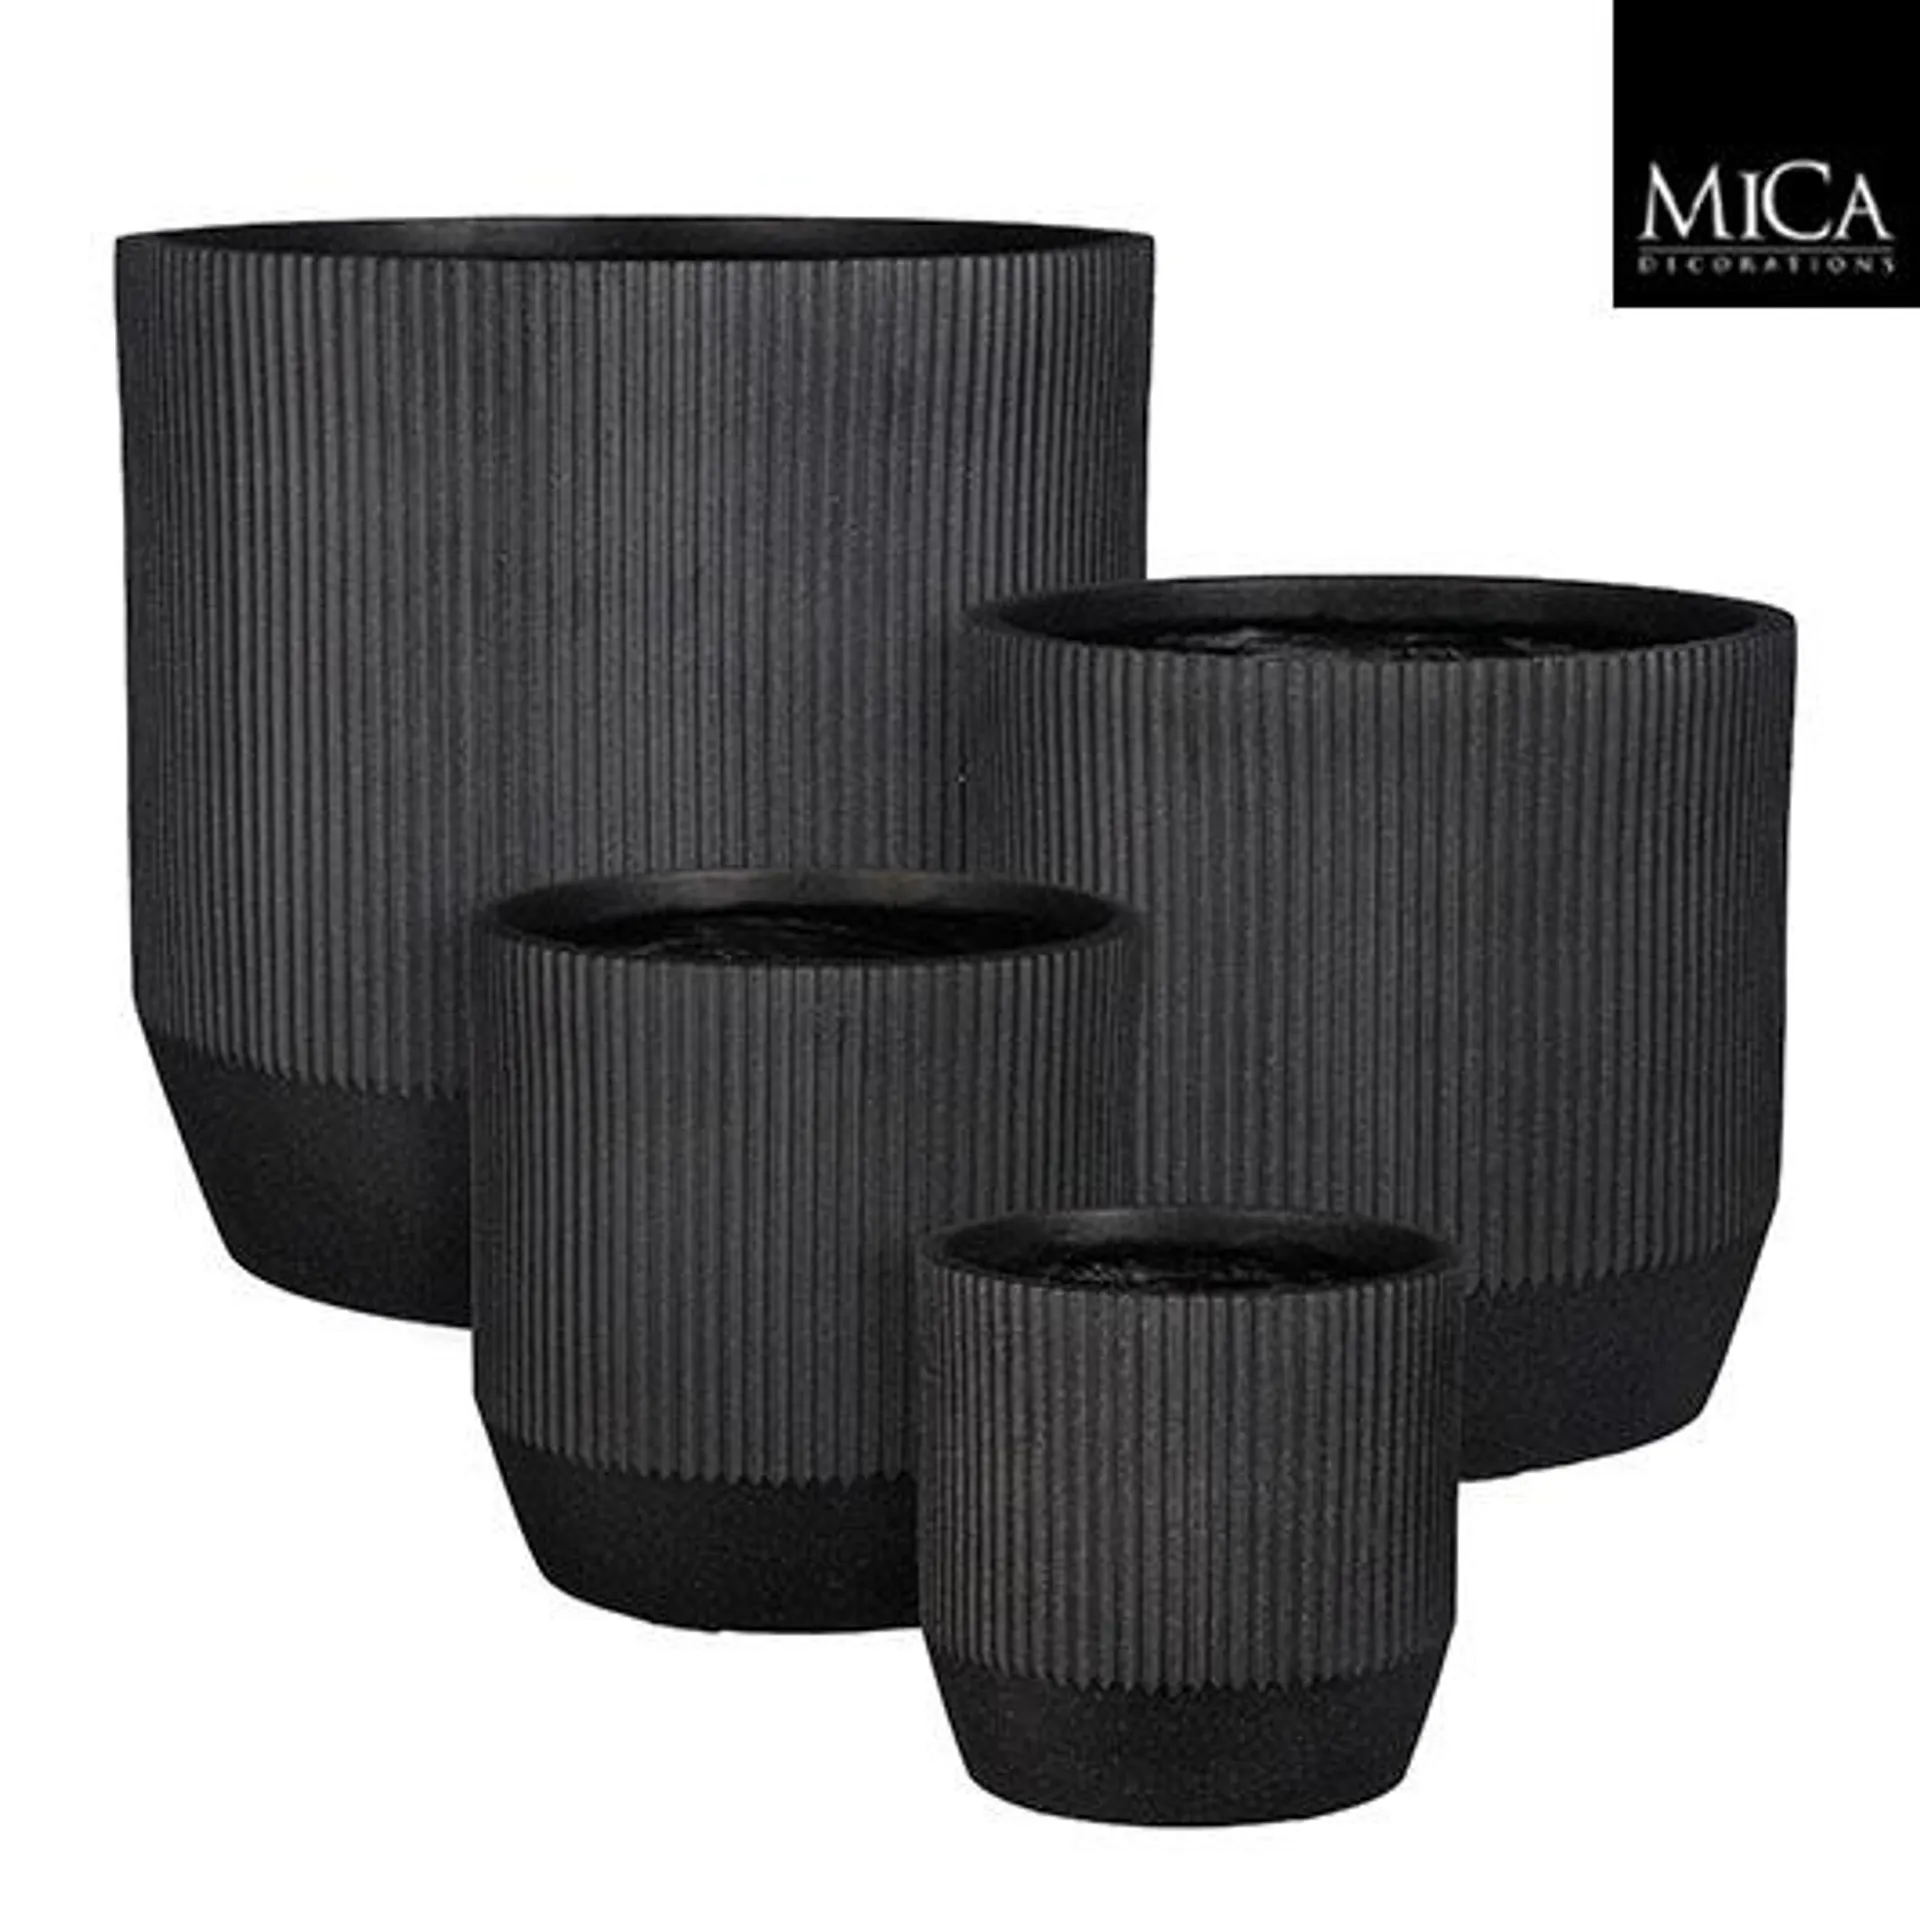 Nuovo Round Outdoor Pot in Black – available in four sizes